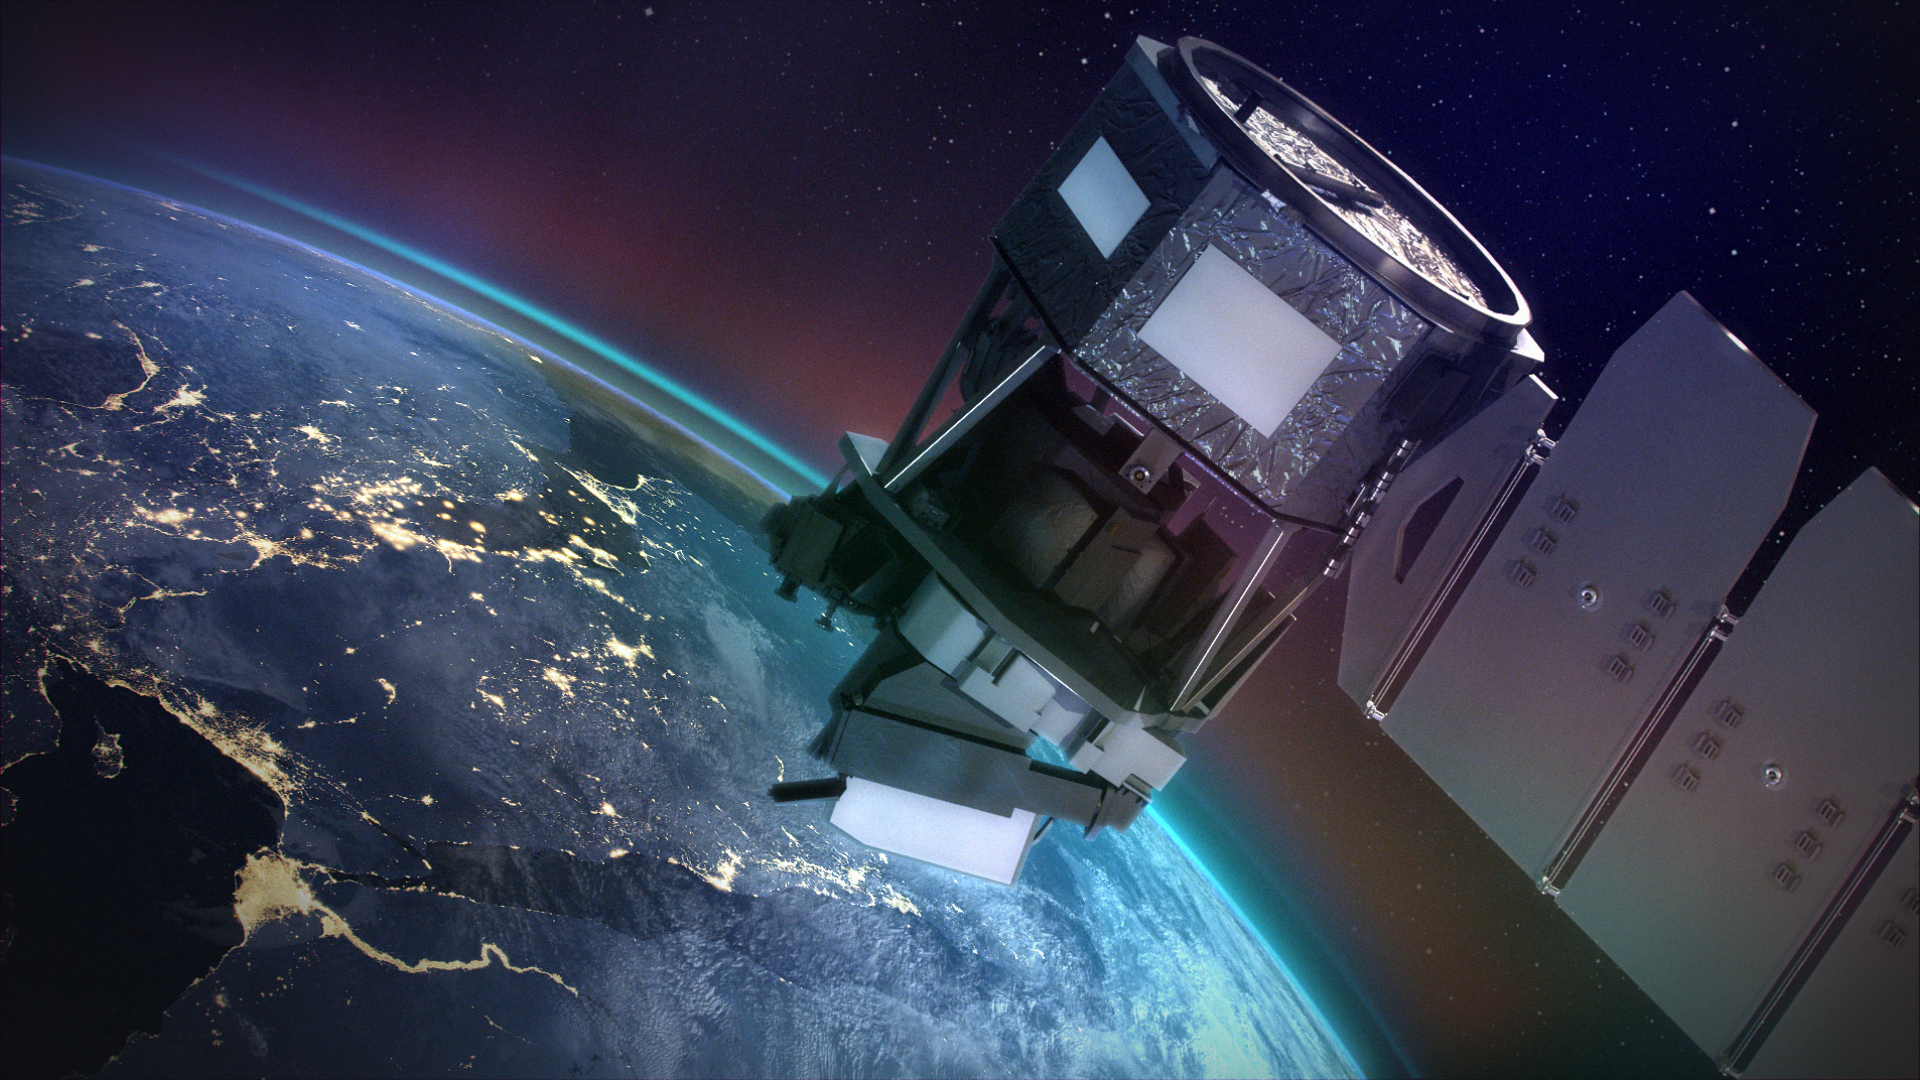 An artist's rendering of the ICON spacecraft orbiting Earth. It is cylindrical with one solar panel extended out the back, off the edge of the image. Earth below appears in shades of turquoise and purple with beaches and cities appearing in shiny gold.